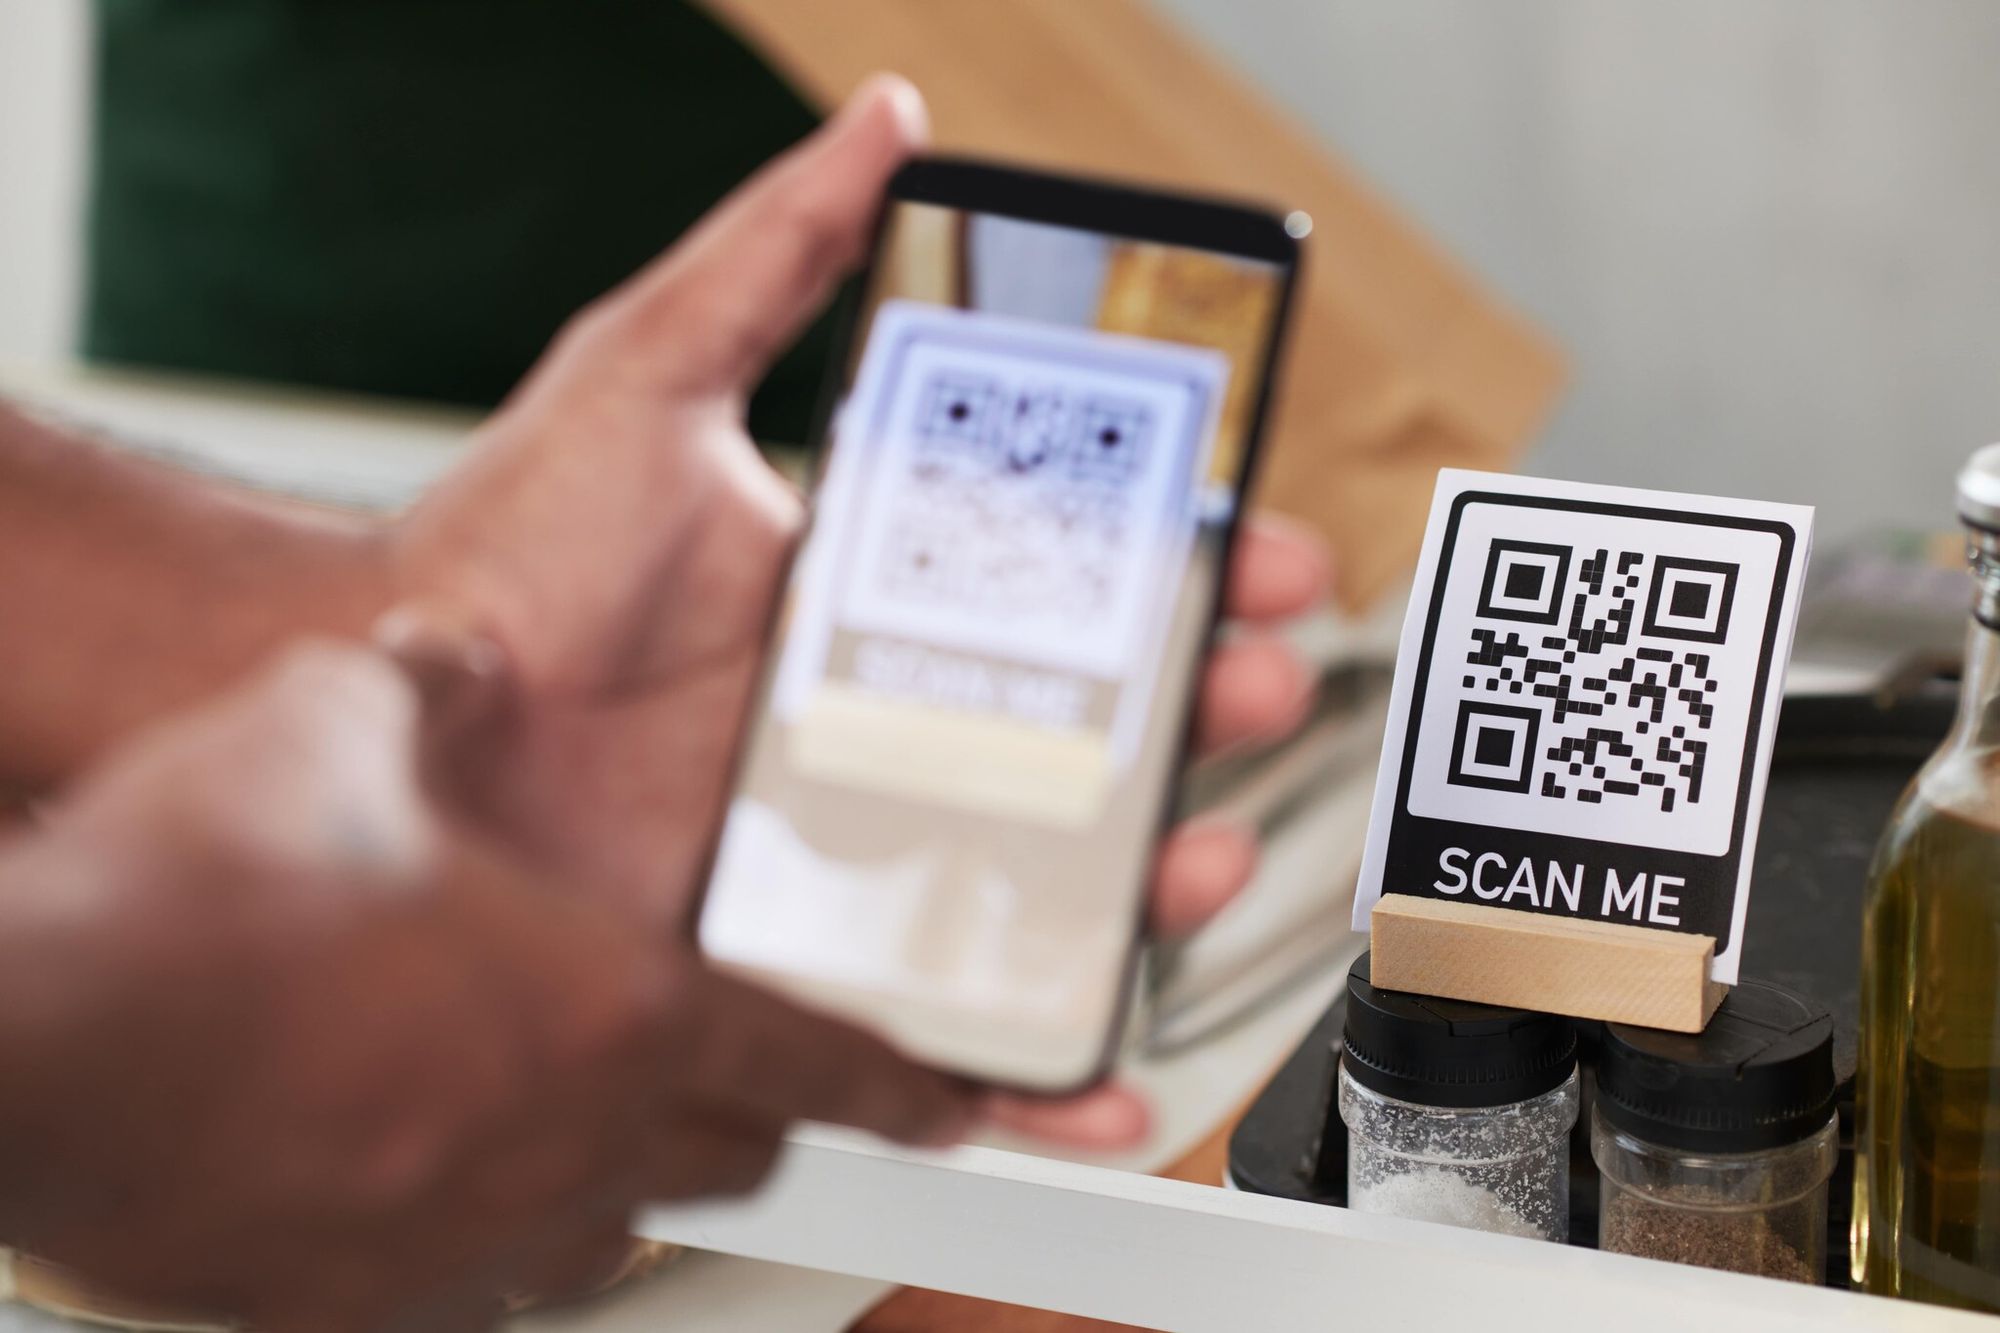 a customer scanning a QR code on the counter